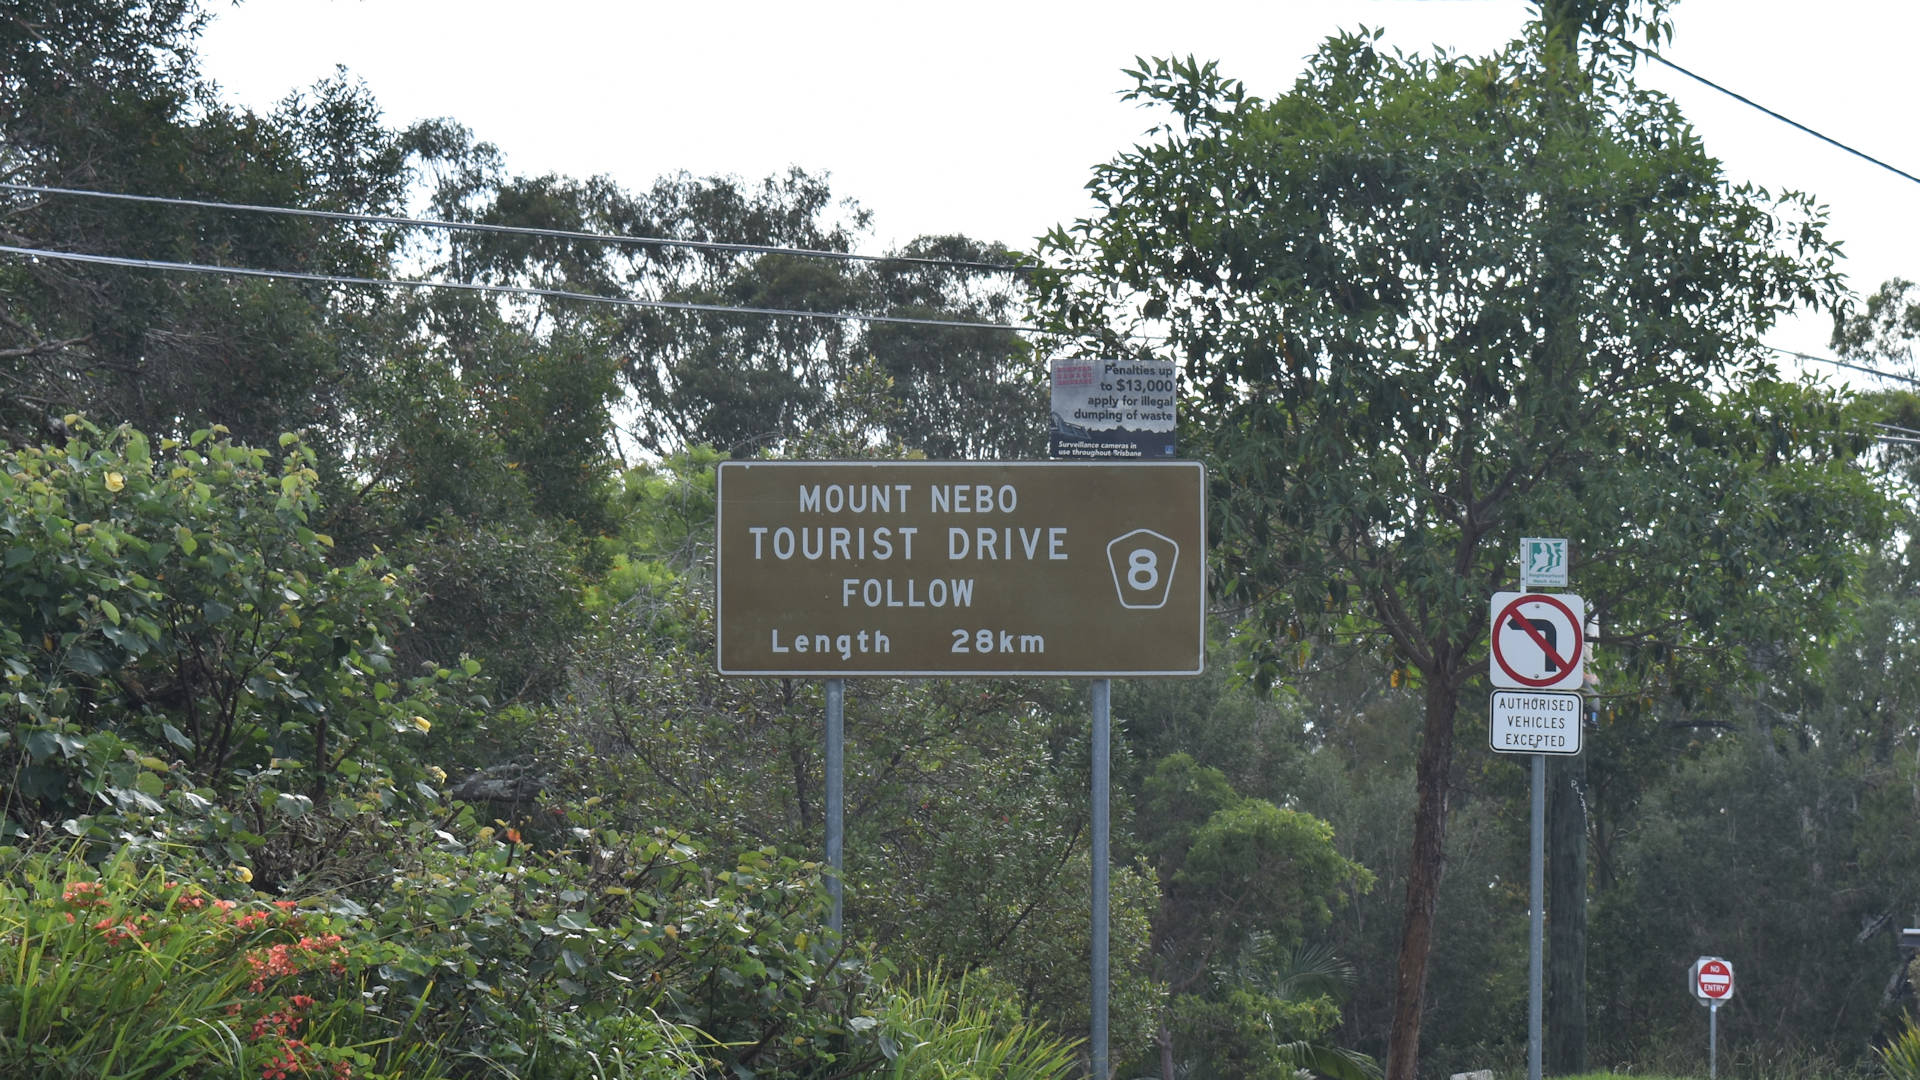 Brown sign for Mount Nebo Tourist Drive, Follow 8, Length 28km